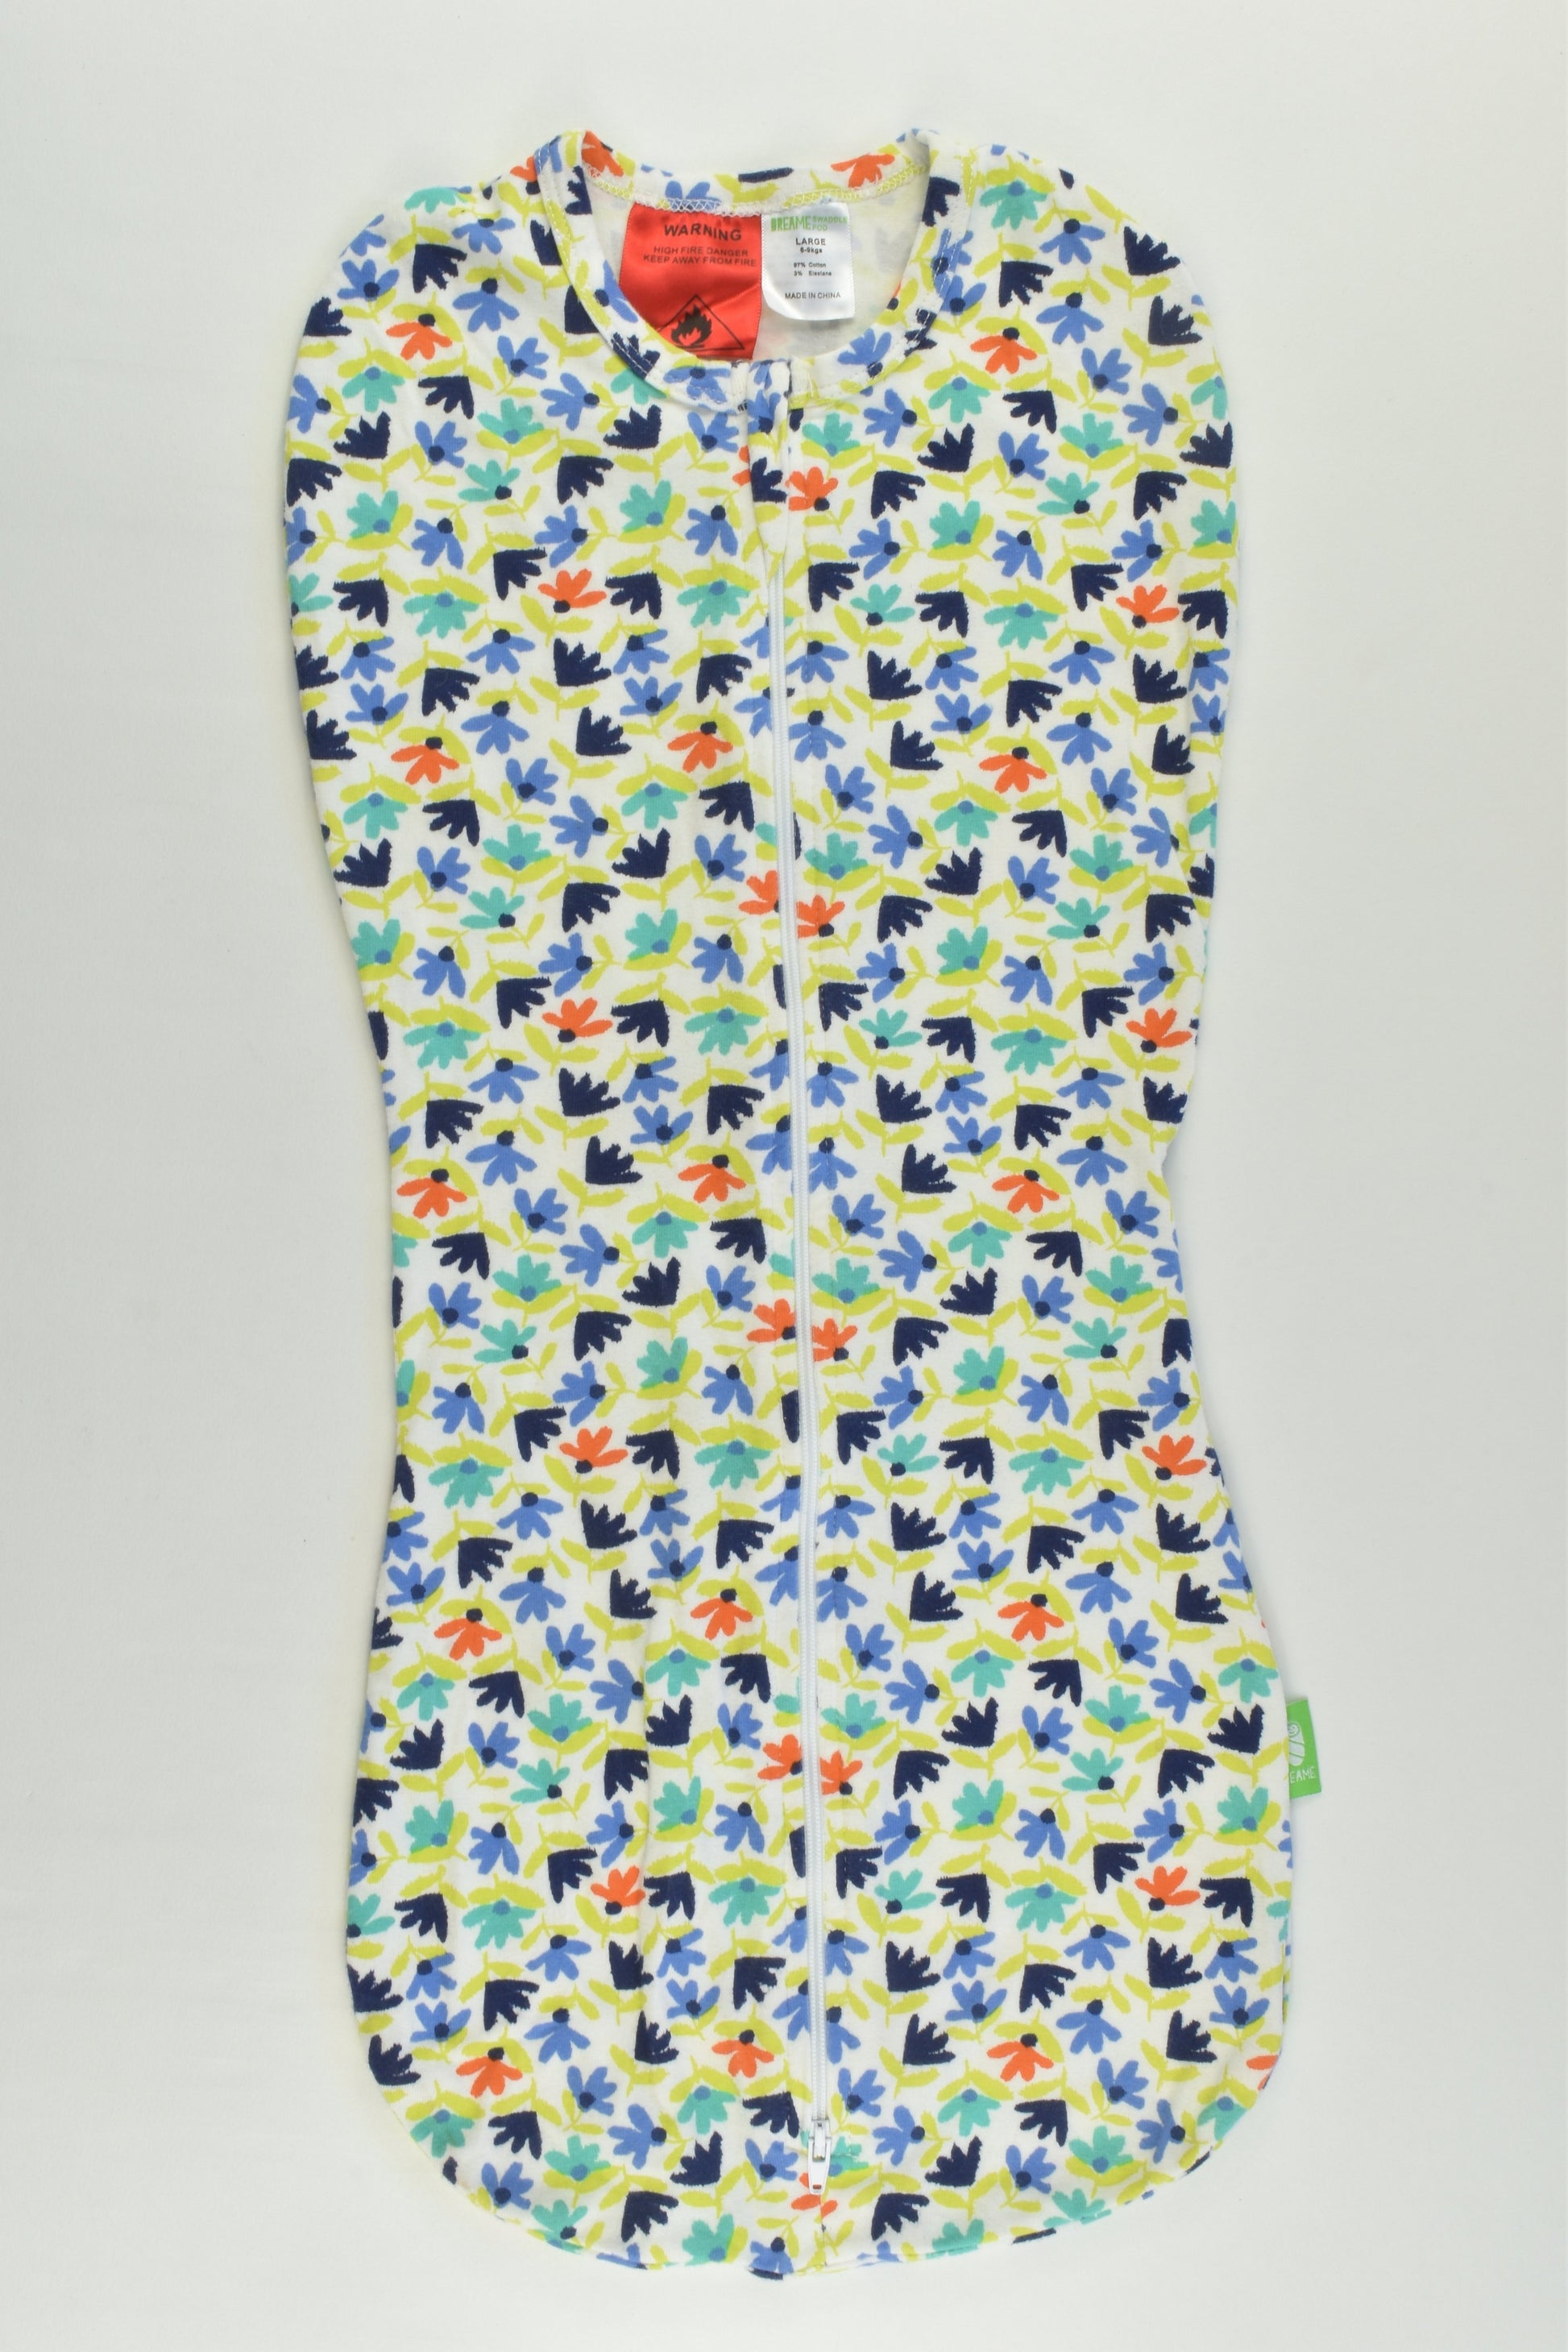 Dreame Swaddle Pod Size approx 000 (6-9 kg) Floral Sleeping Bag Swaddle